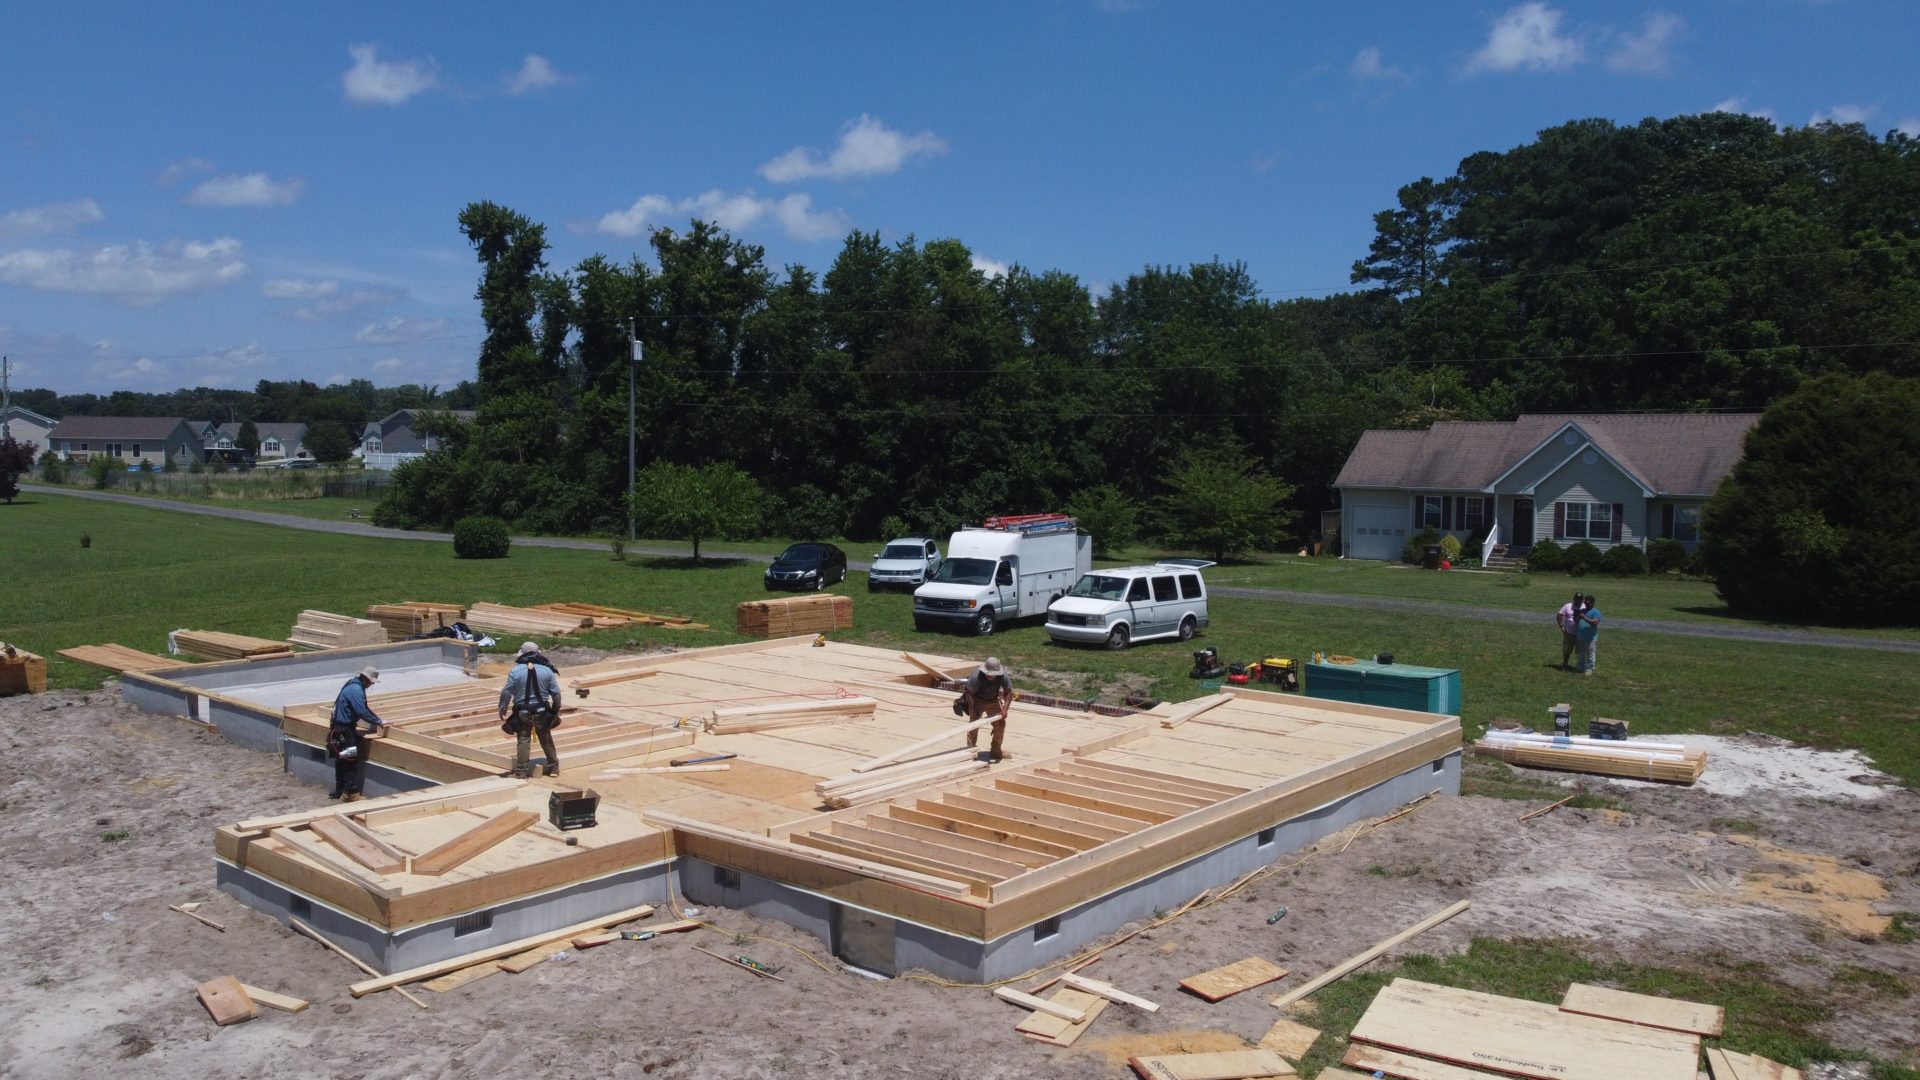 Construction workers during the early phases of building a custom home in Pocomoke City, MD